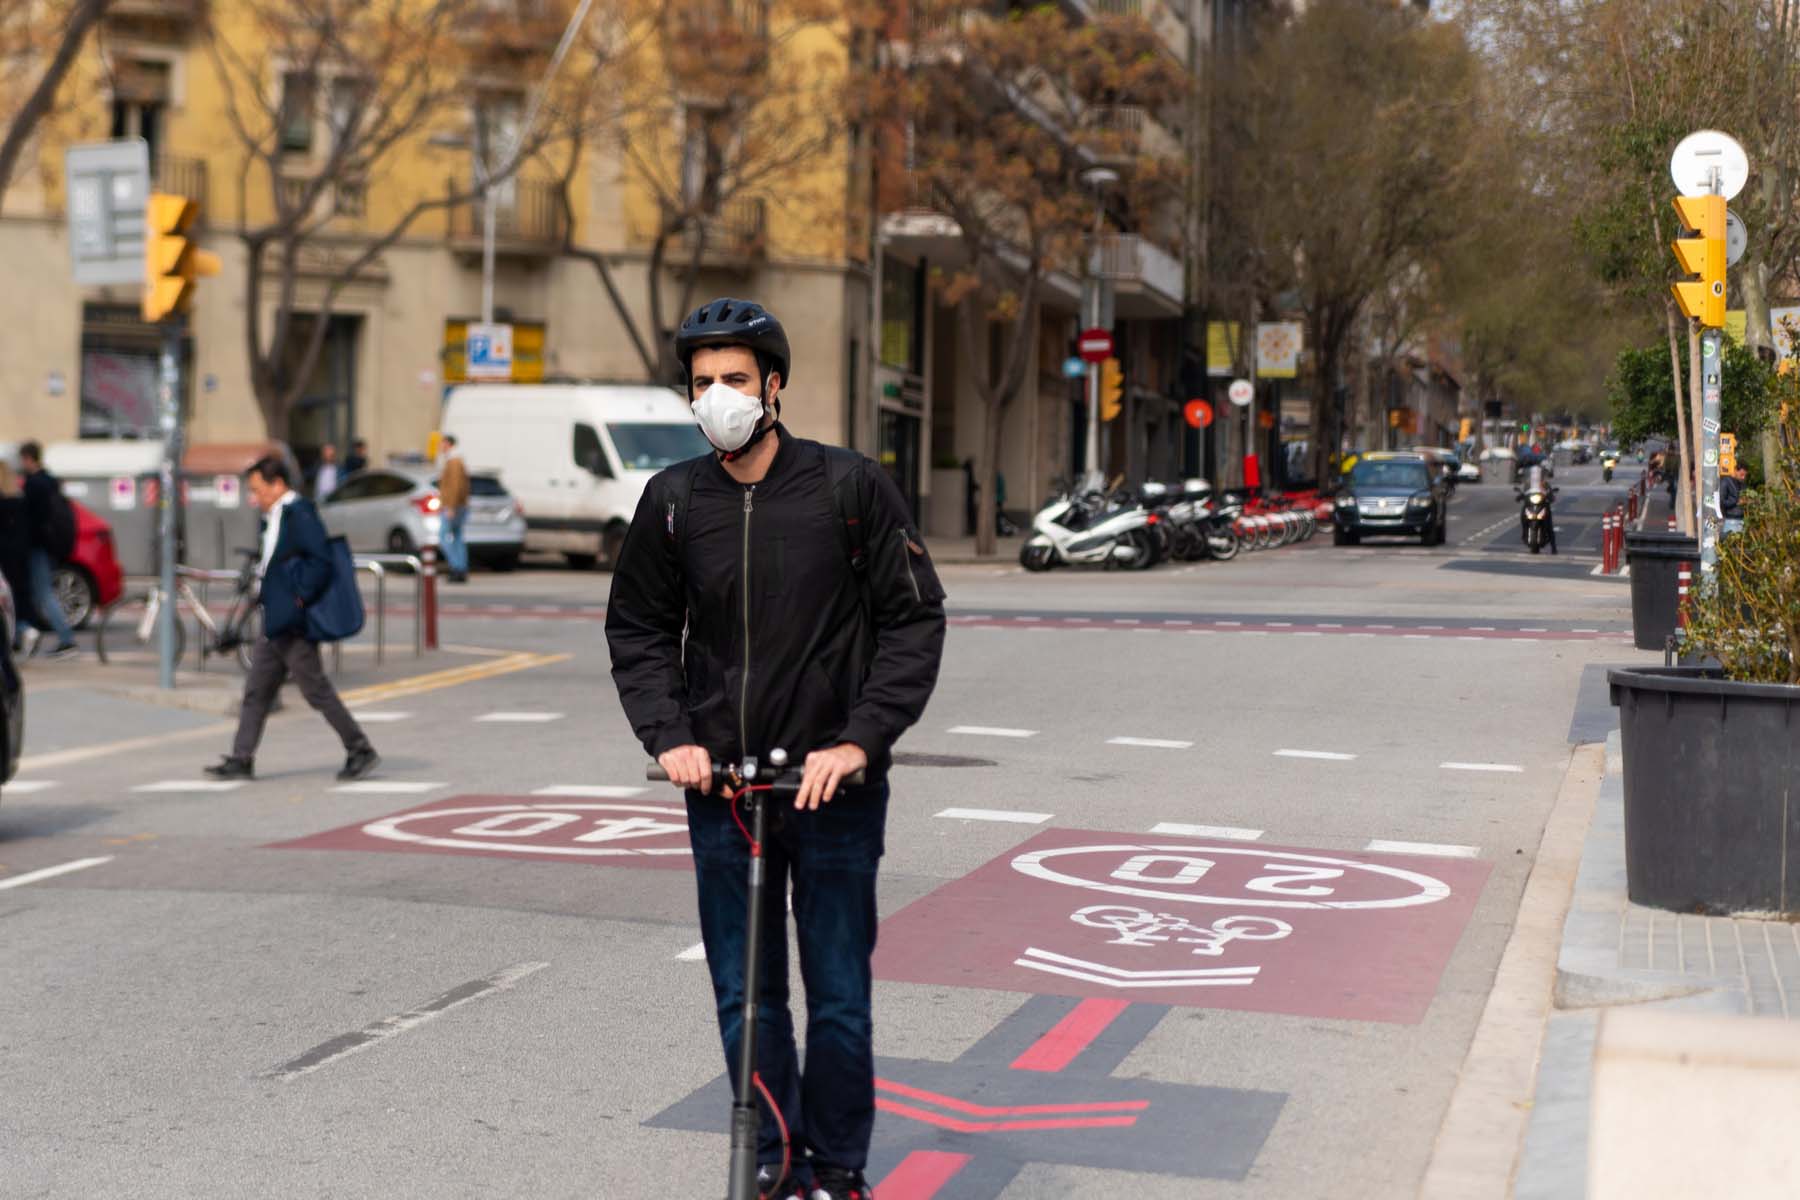 man wearing mask on scooter in Spain during Covid